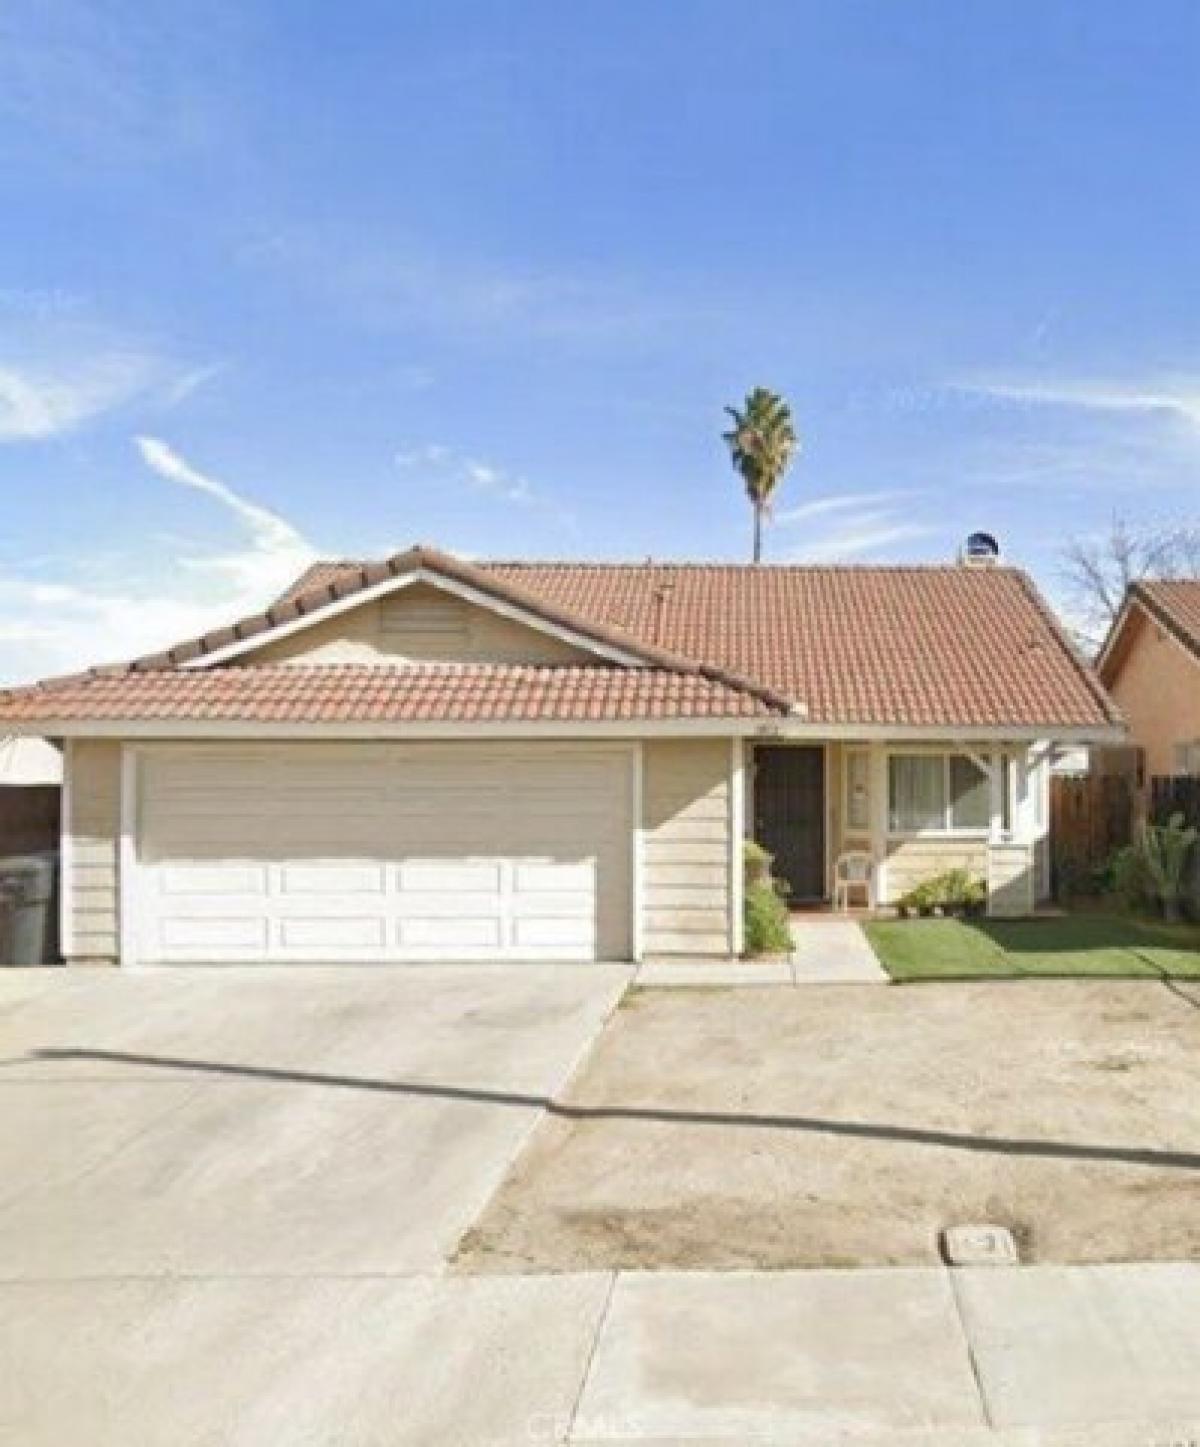 Picture of Home For Rent in Perris, California, United States